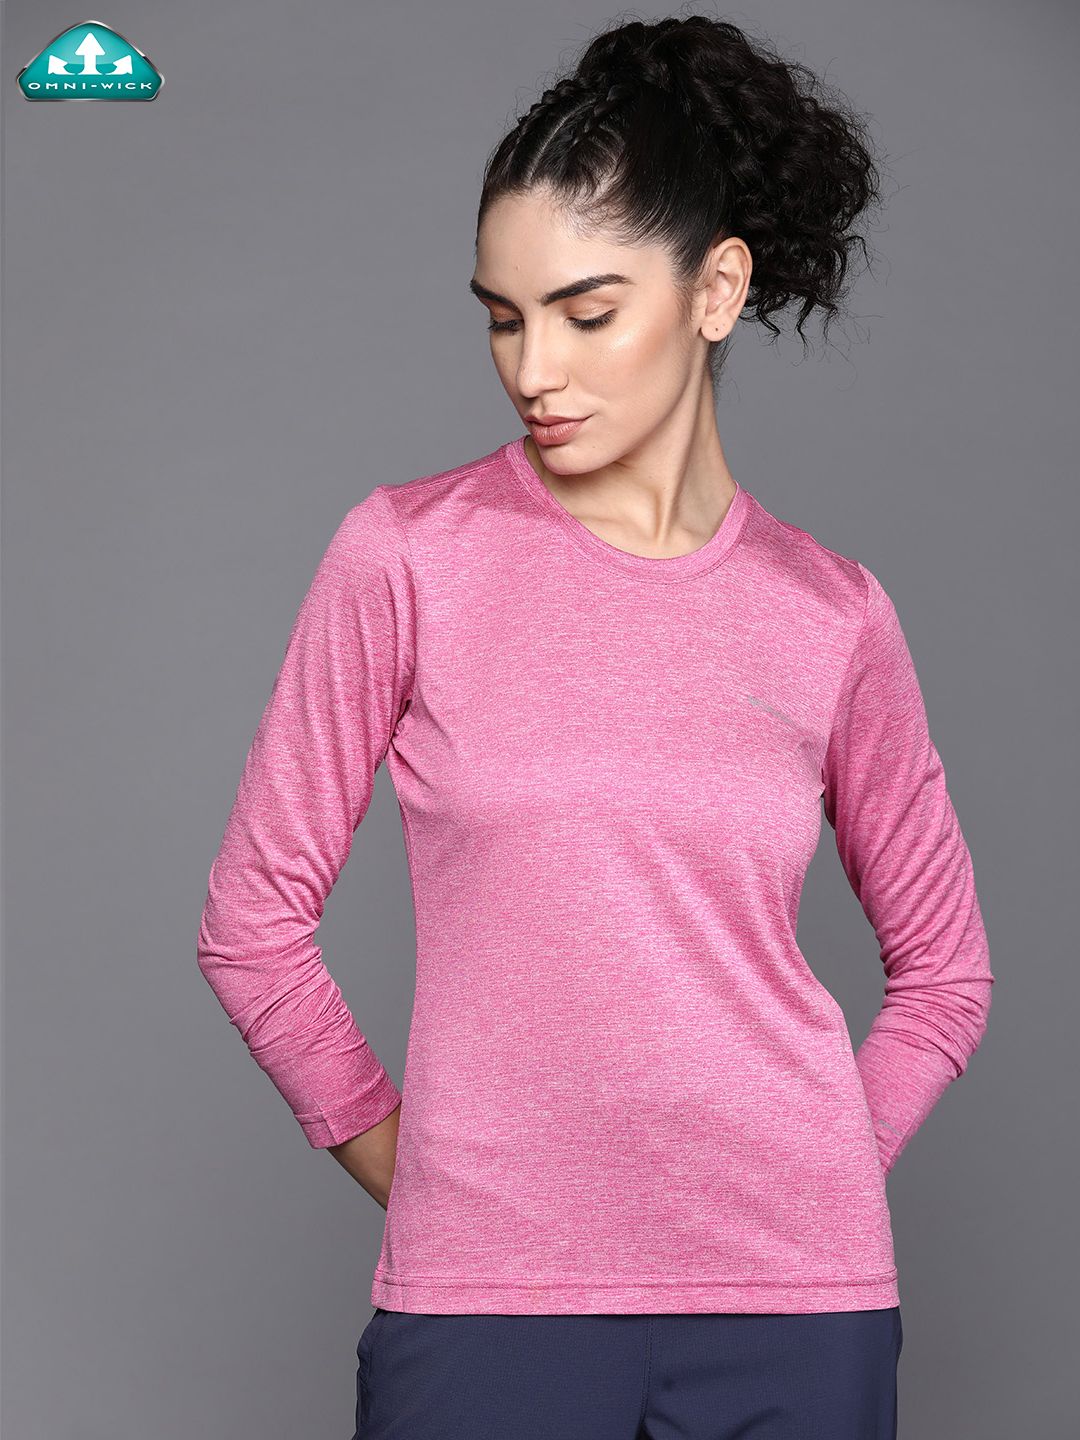 Columbia Women Pink Slim Fit T-shirt Price in India